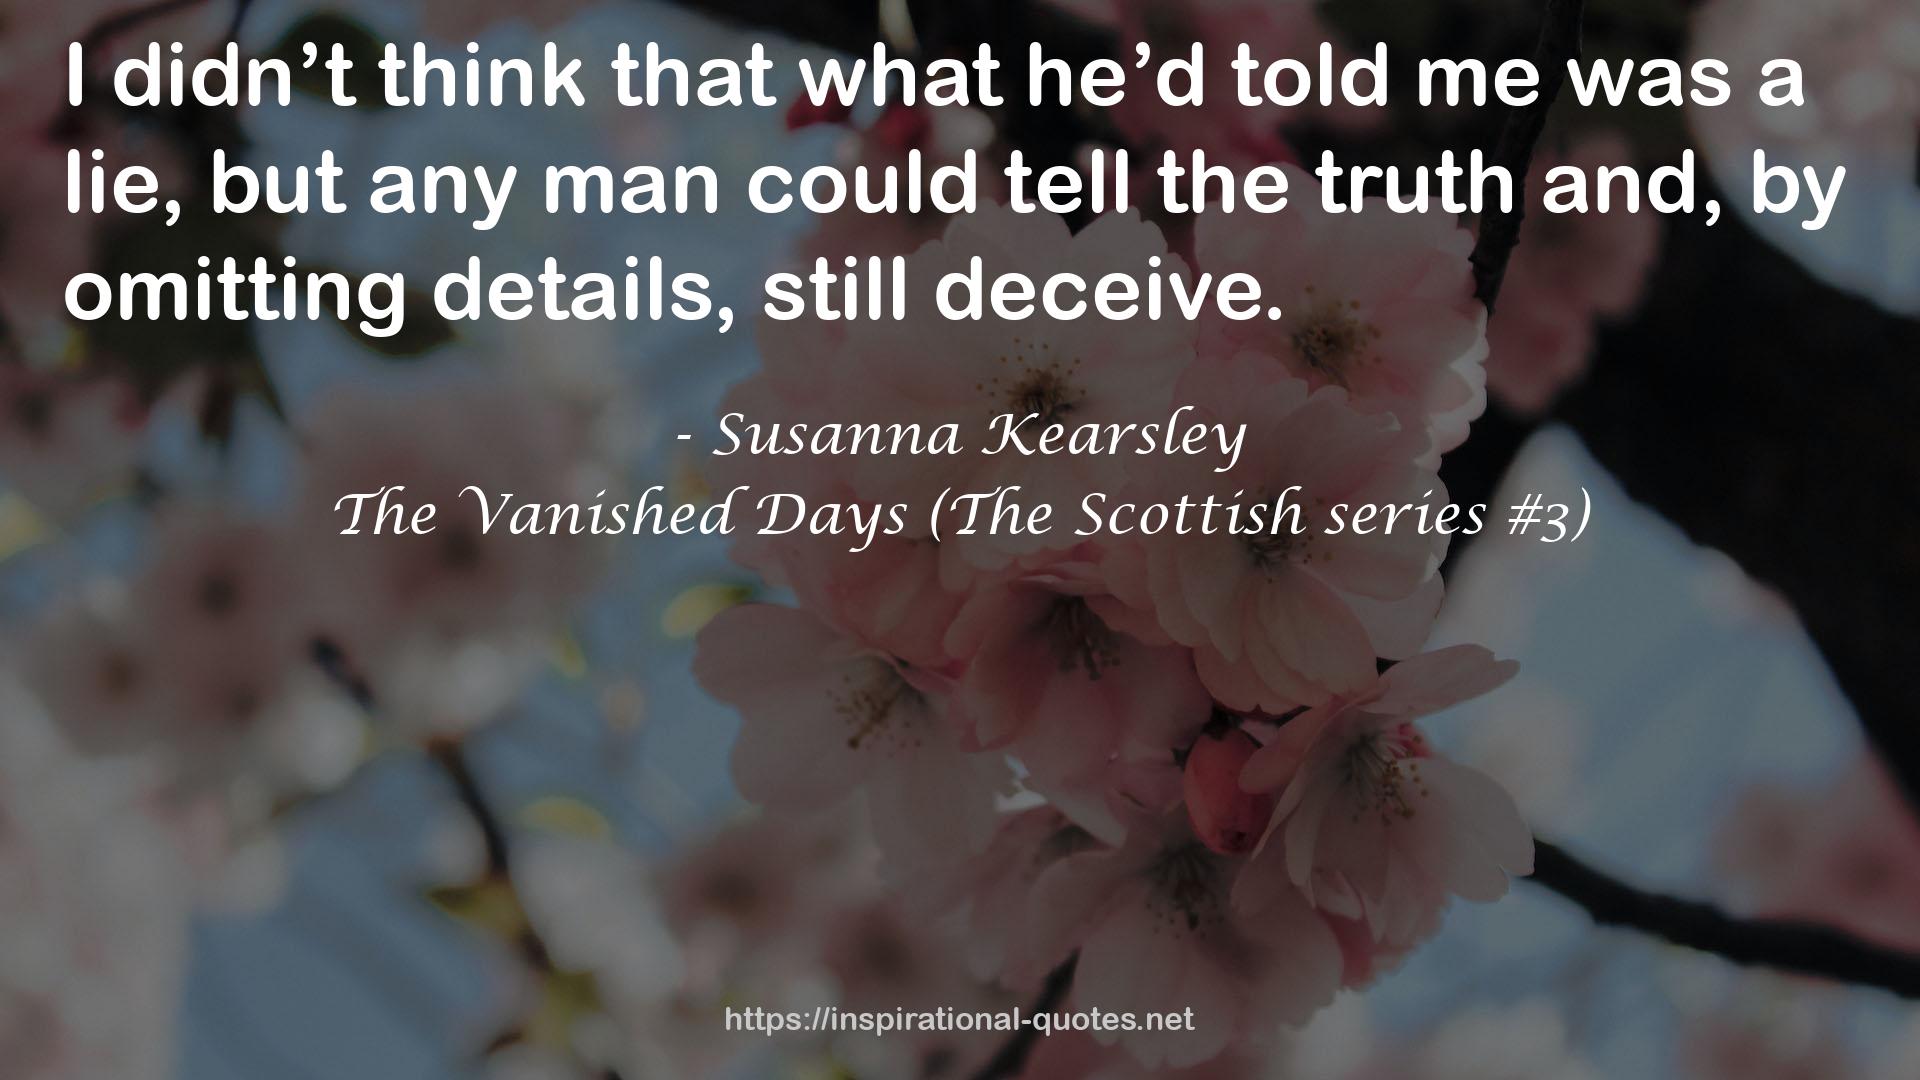 The Vanished Days (The Scottish series #3) QUOTES